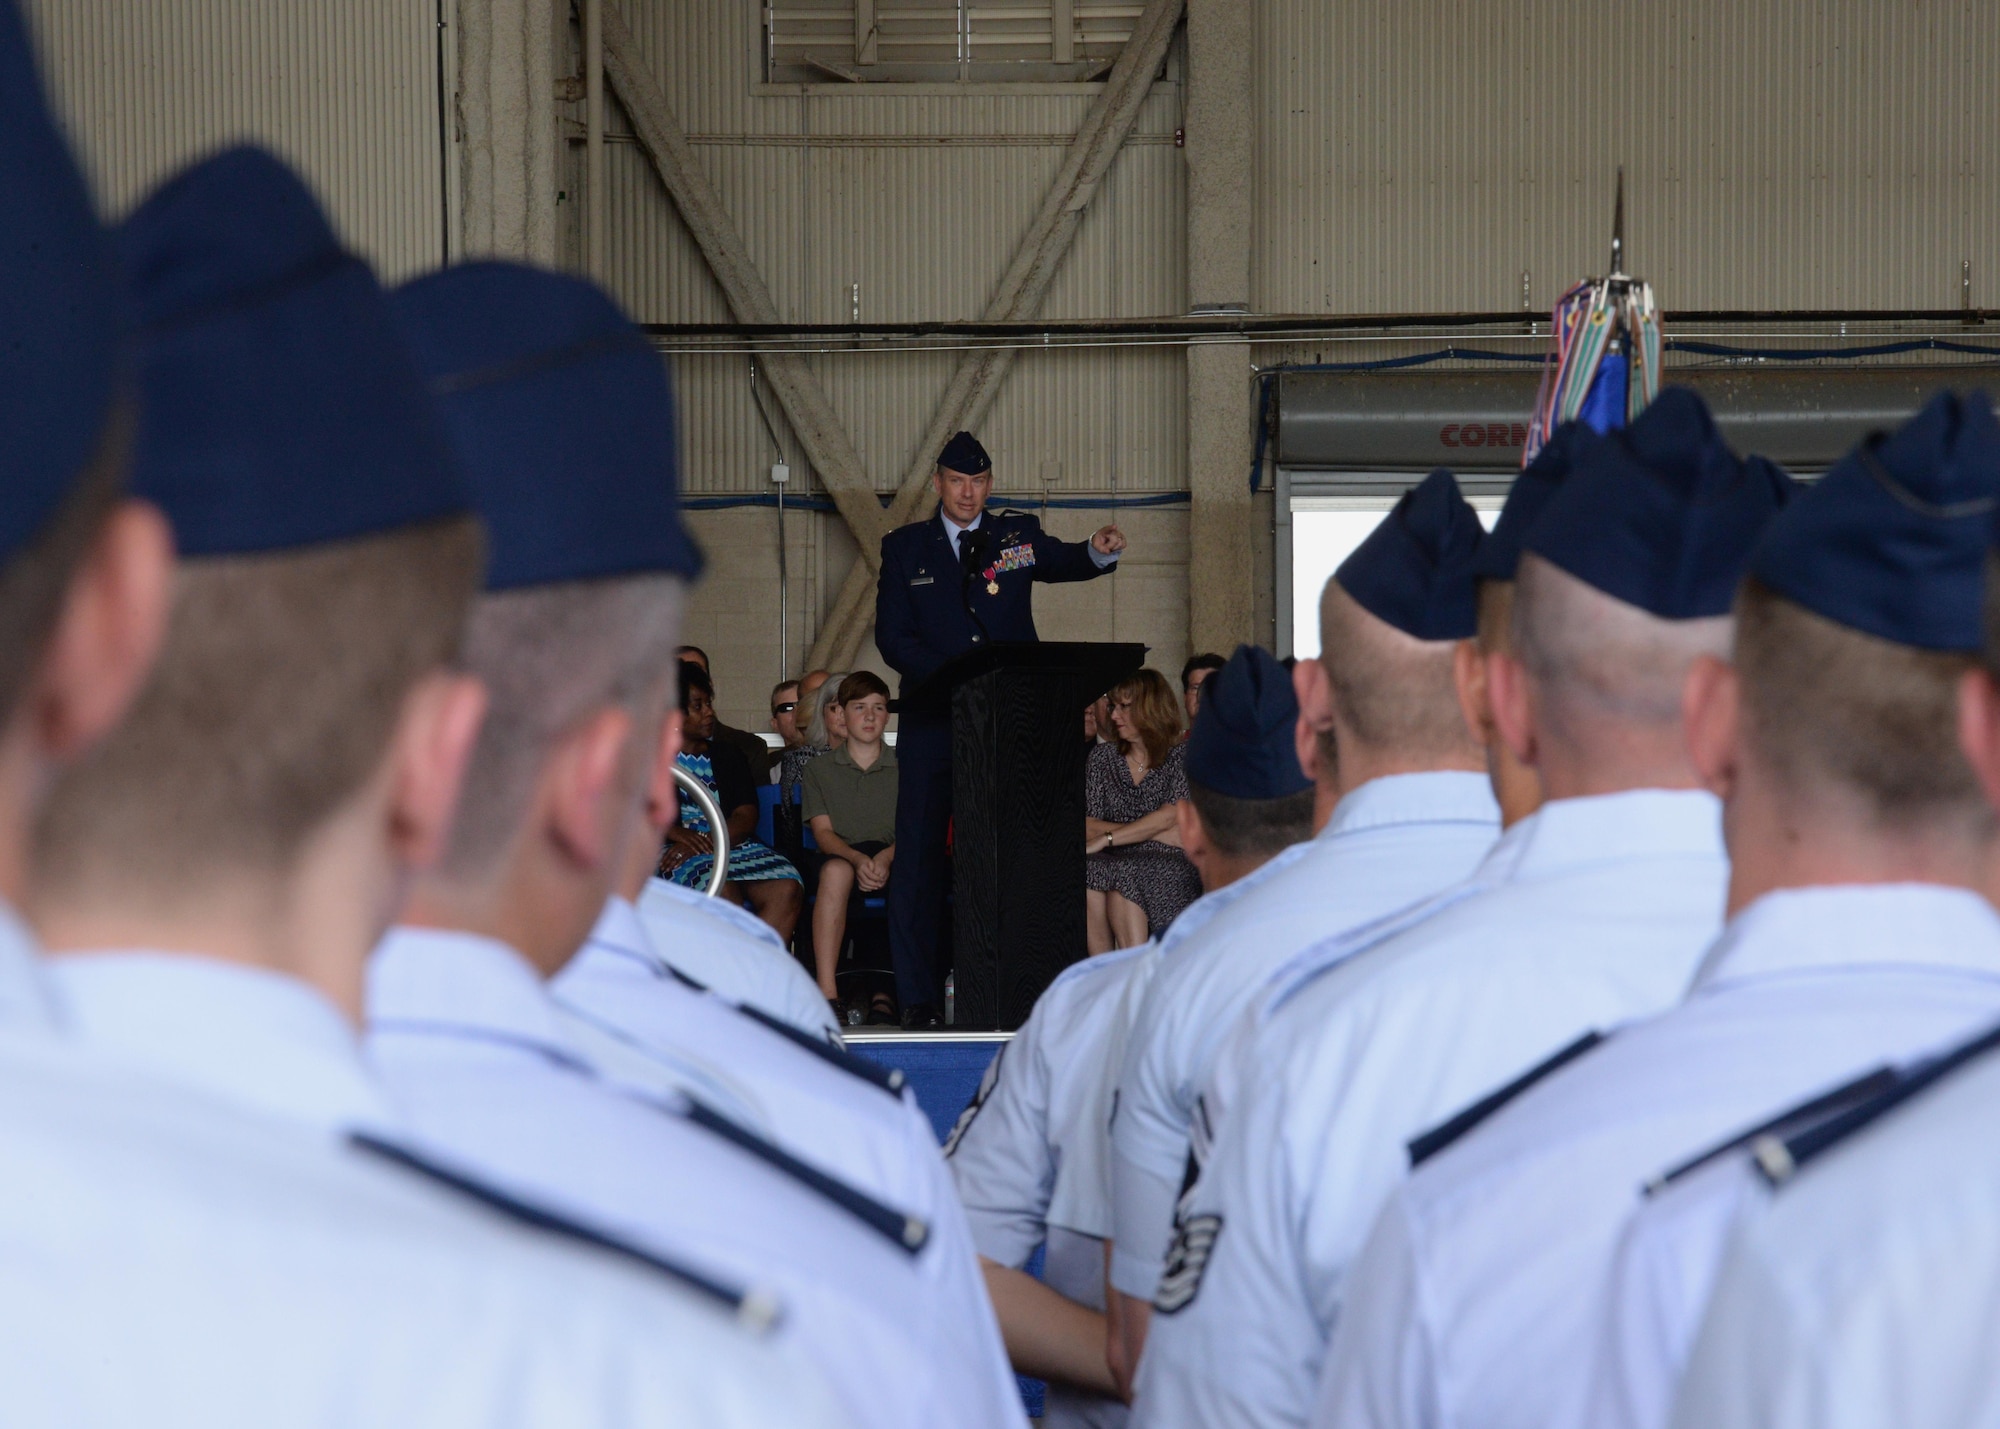 U.S. Air Force Col. Bill Spangenthal, outgoing 97th Air Mobility Wing commander, addresses the Airmen of Altus Air Force Base, Oklahoma, during the 97th AMW Change of Command Ceremony here June 26, 2015. Spangenthal transferred command of the 97th AMW to U.S. Air Force Col. Todd Hohn after serving in the role since June 2013. (U.S. Air Force photo by Airman 1st Class Megan E. Acs)